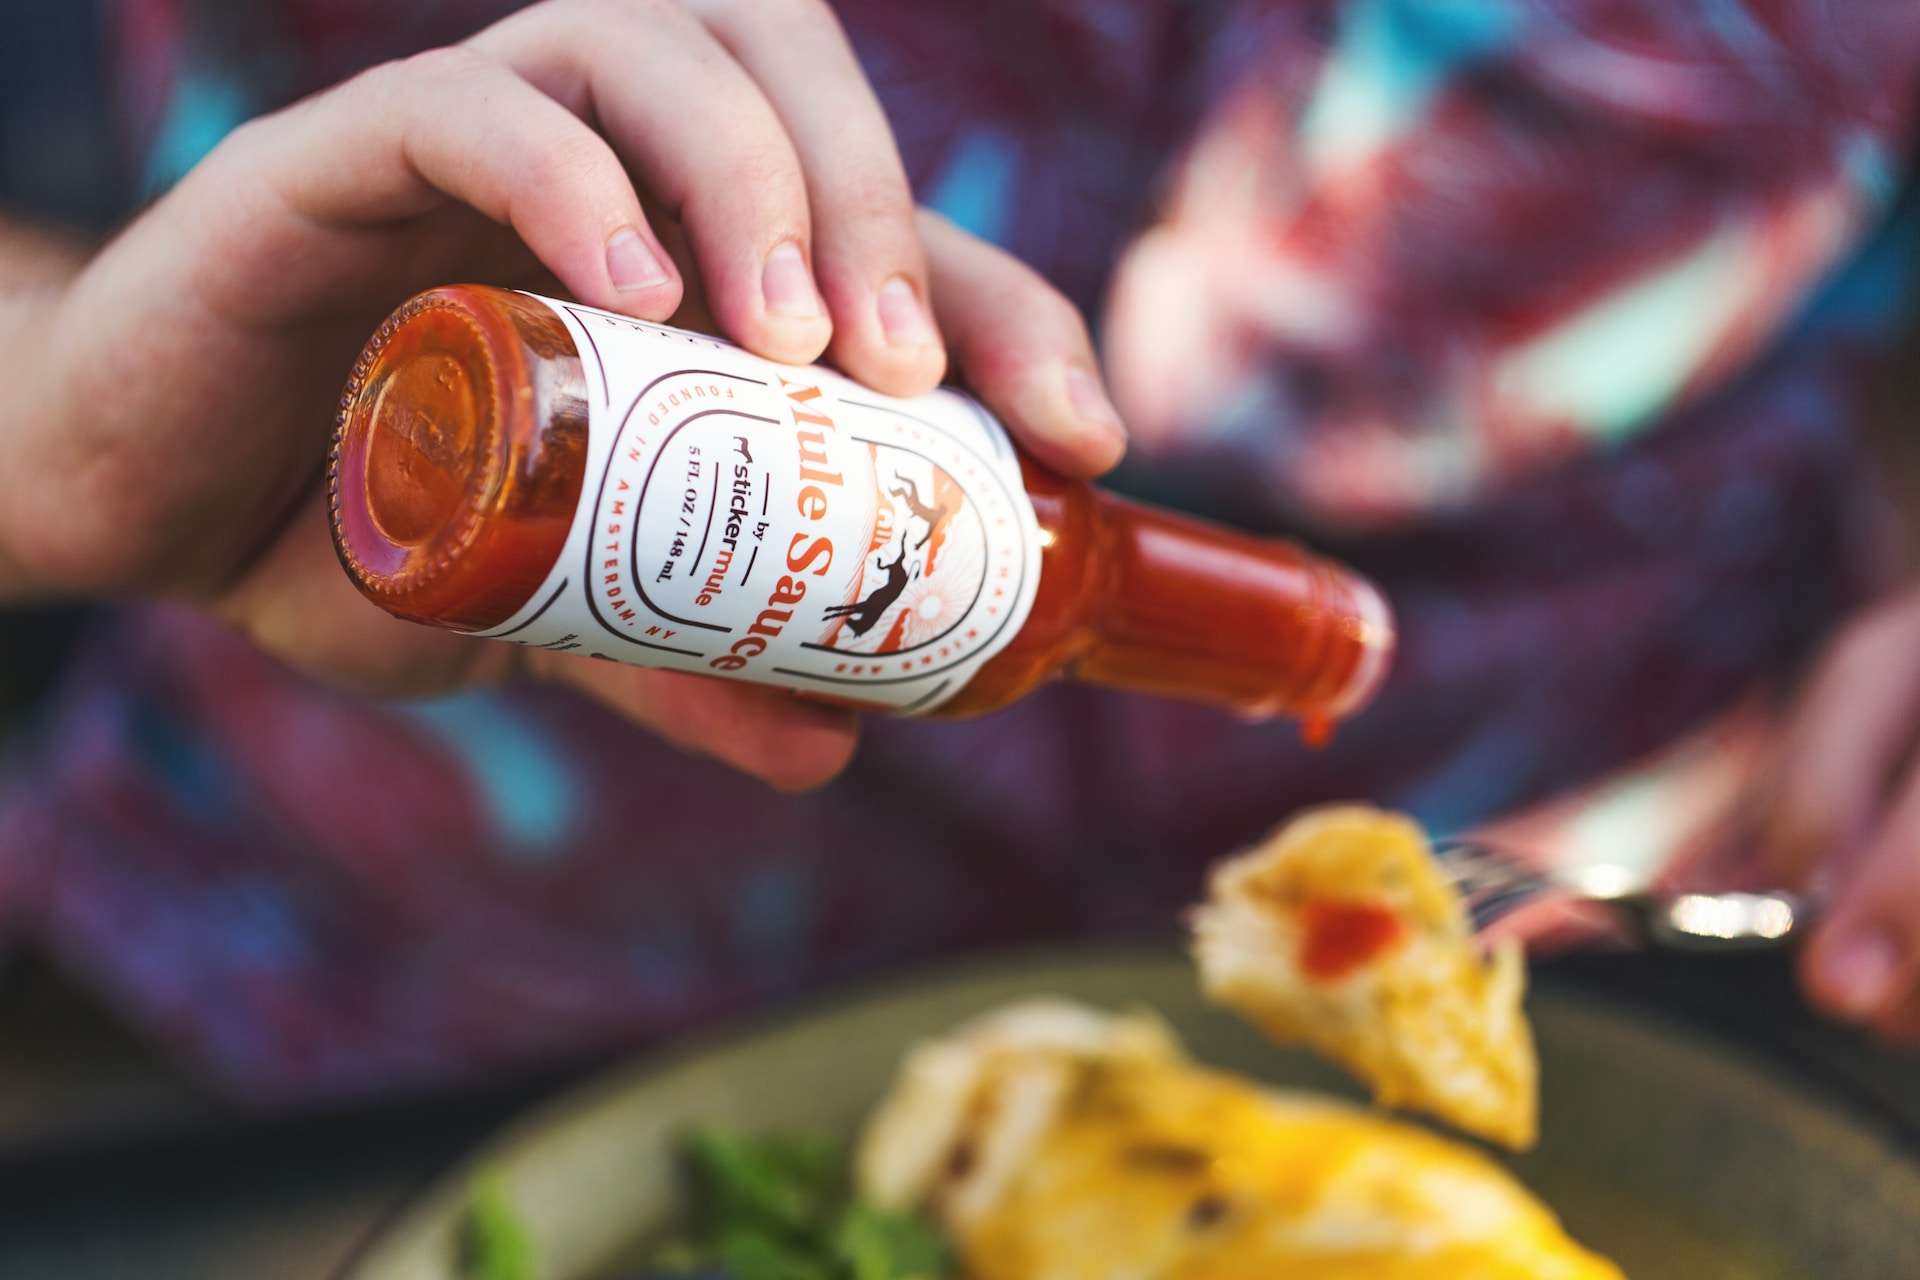 Challenge your taste buds with these fiery condiments for National